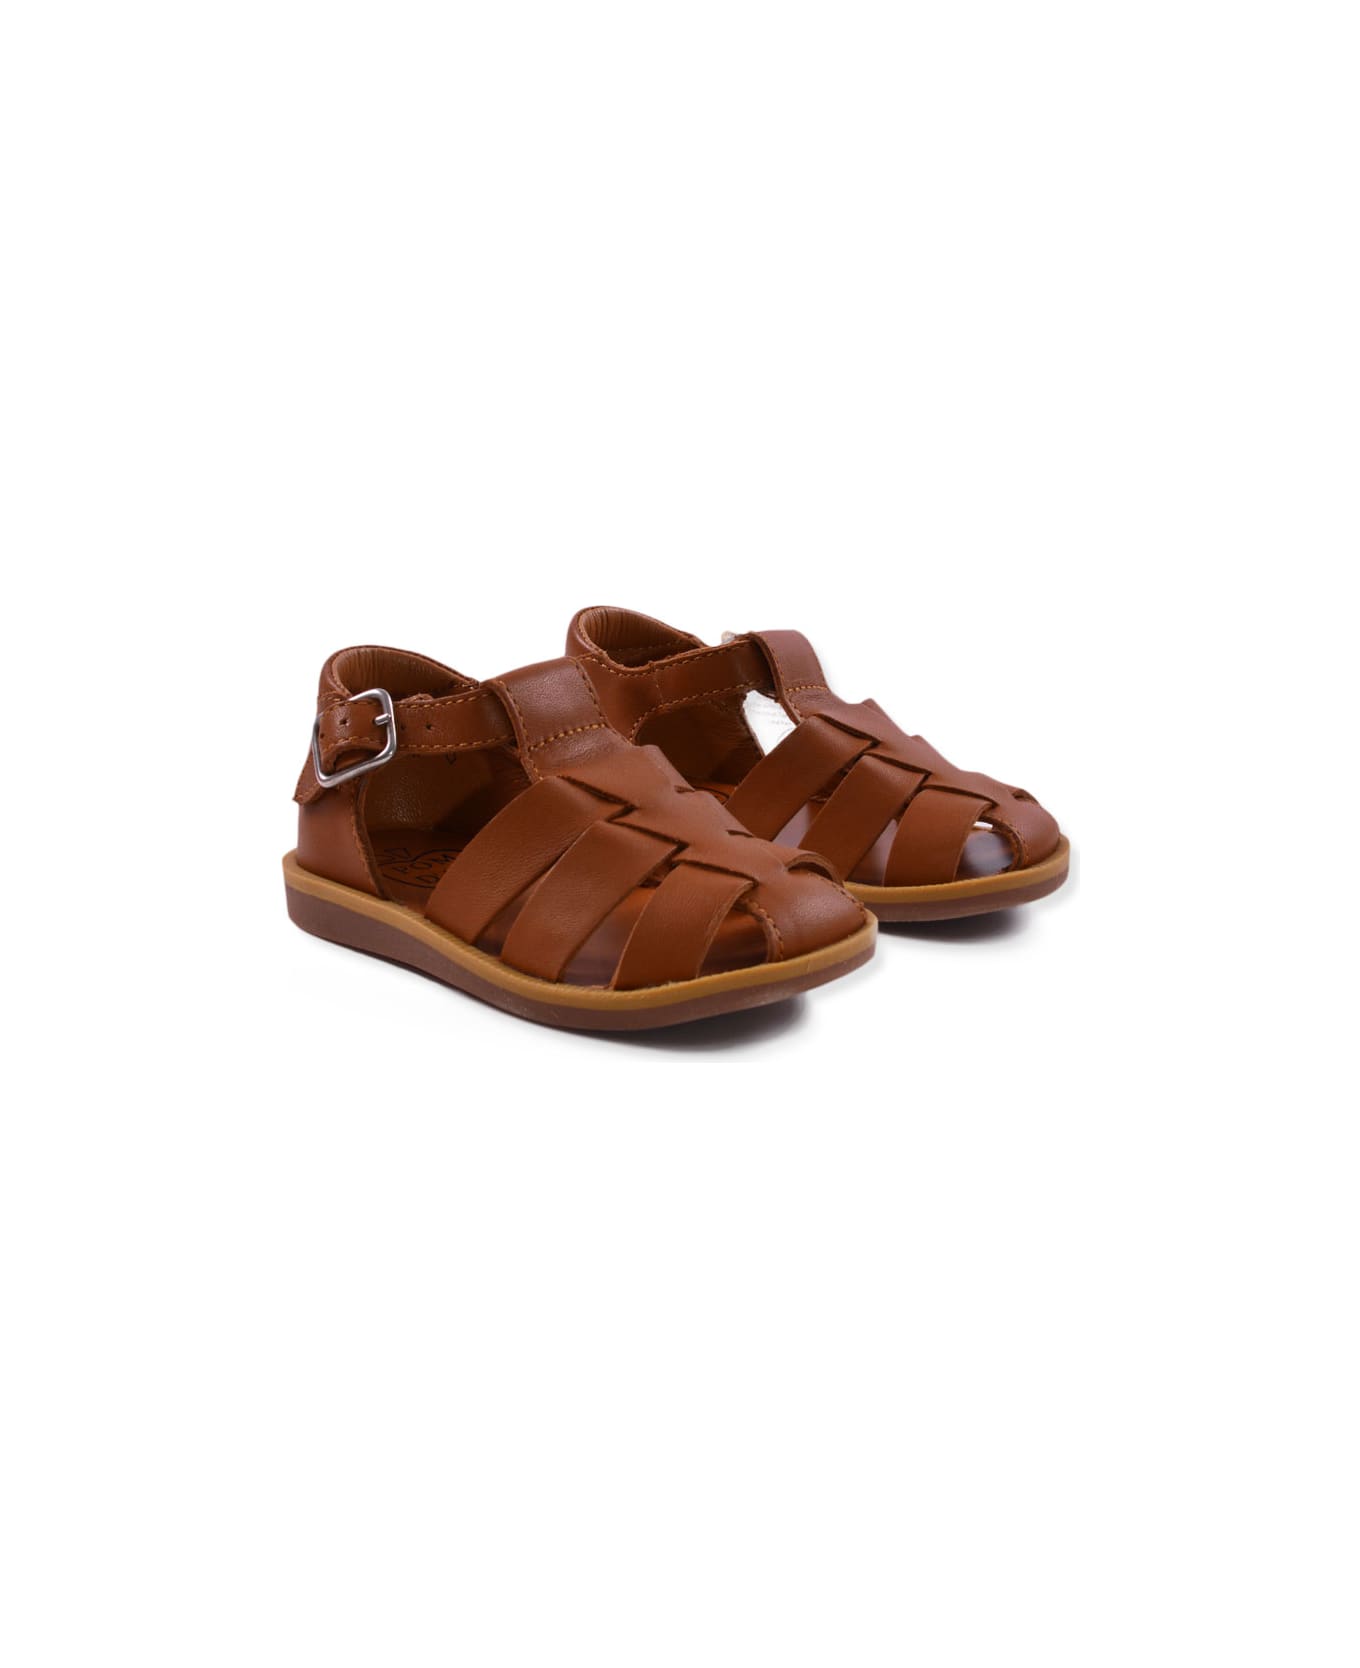 Pom d'Api Open Sandals In Smooth Leather - Brown